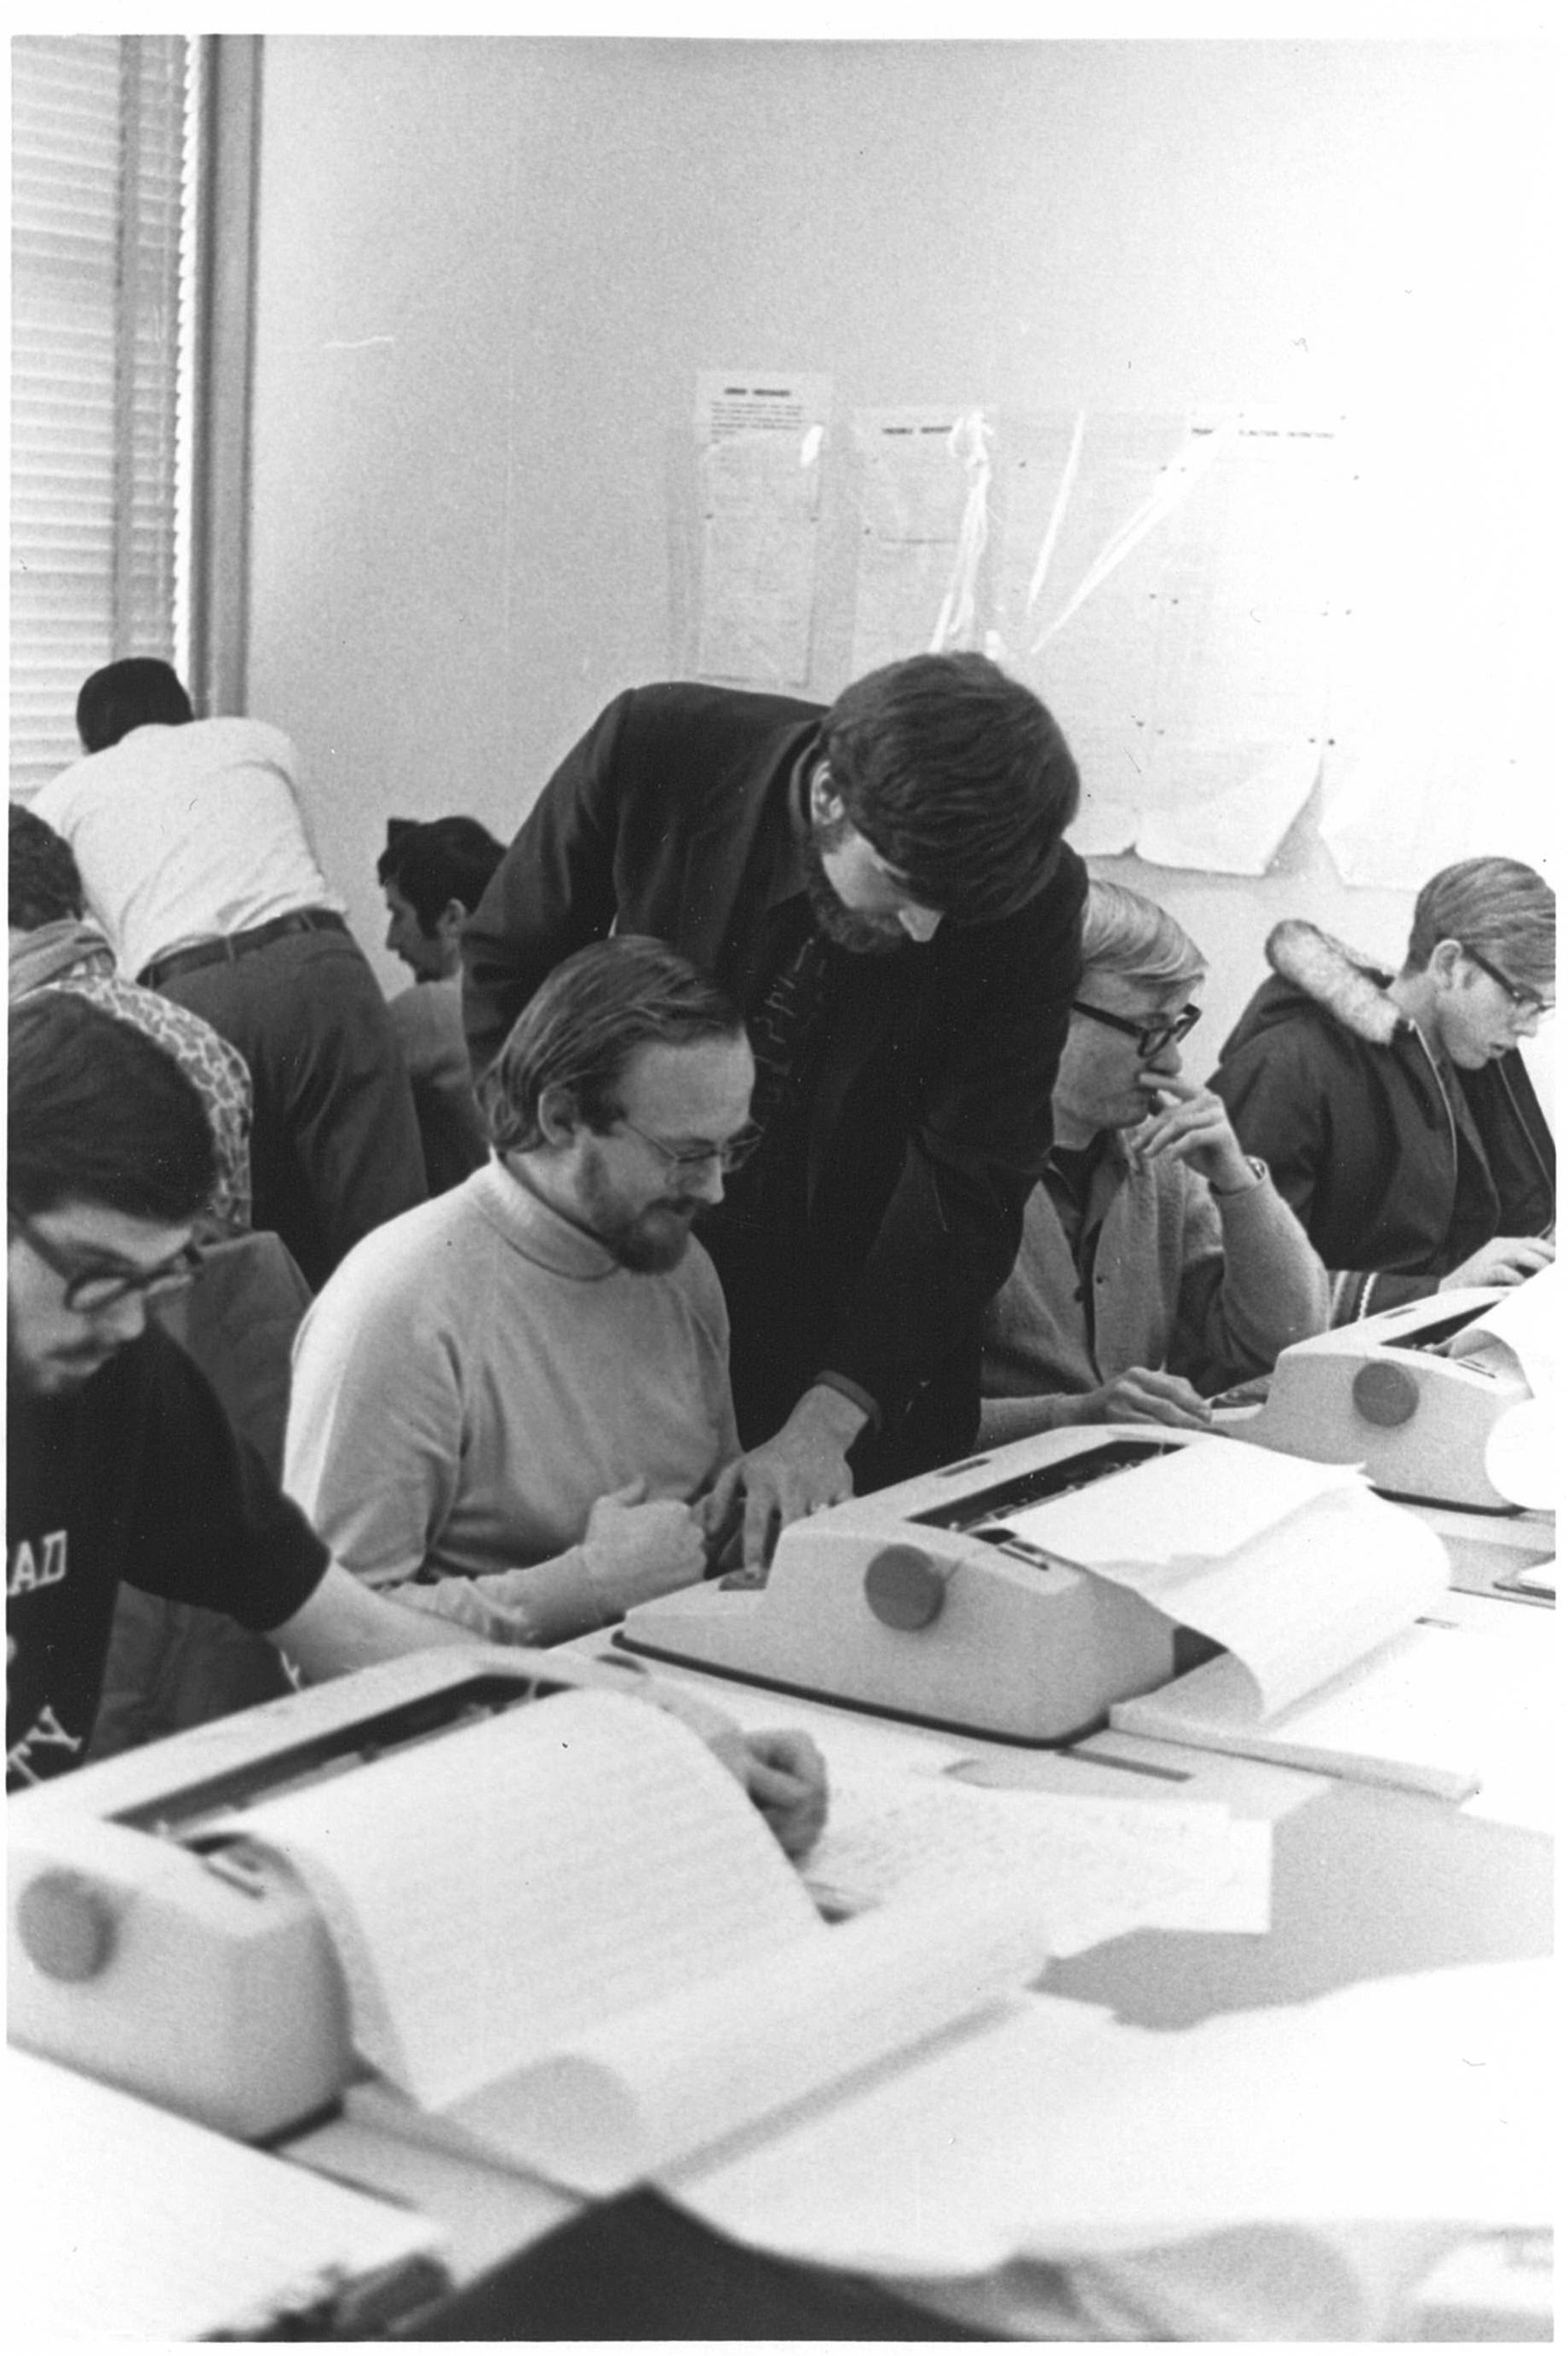 Computer Centre employees help users at Lakehead APL terminals in the 1970s.